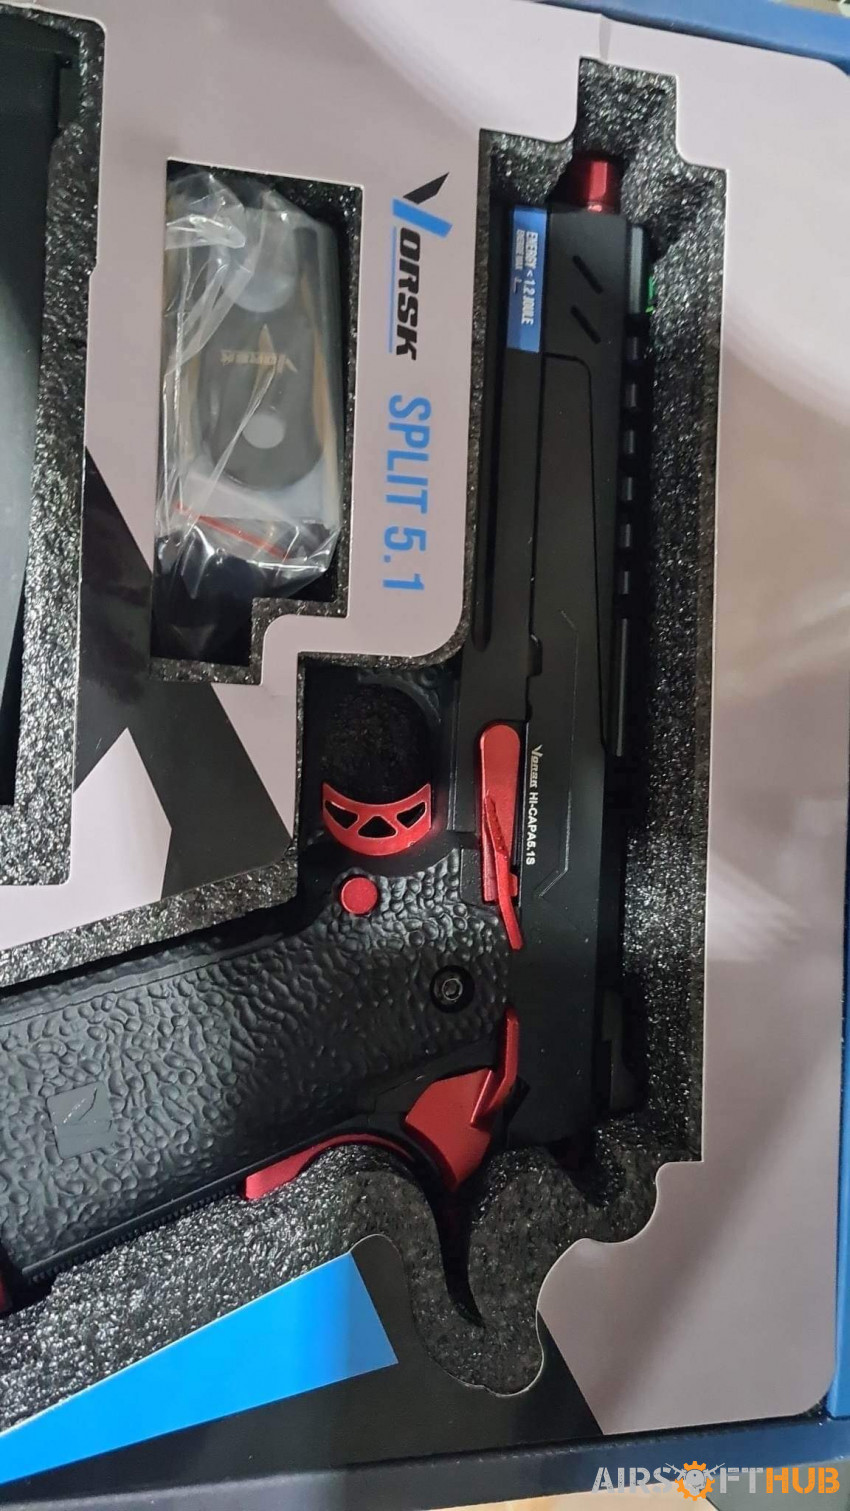 For sale pistols look at pictu - Used airsoft equipment